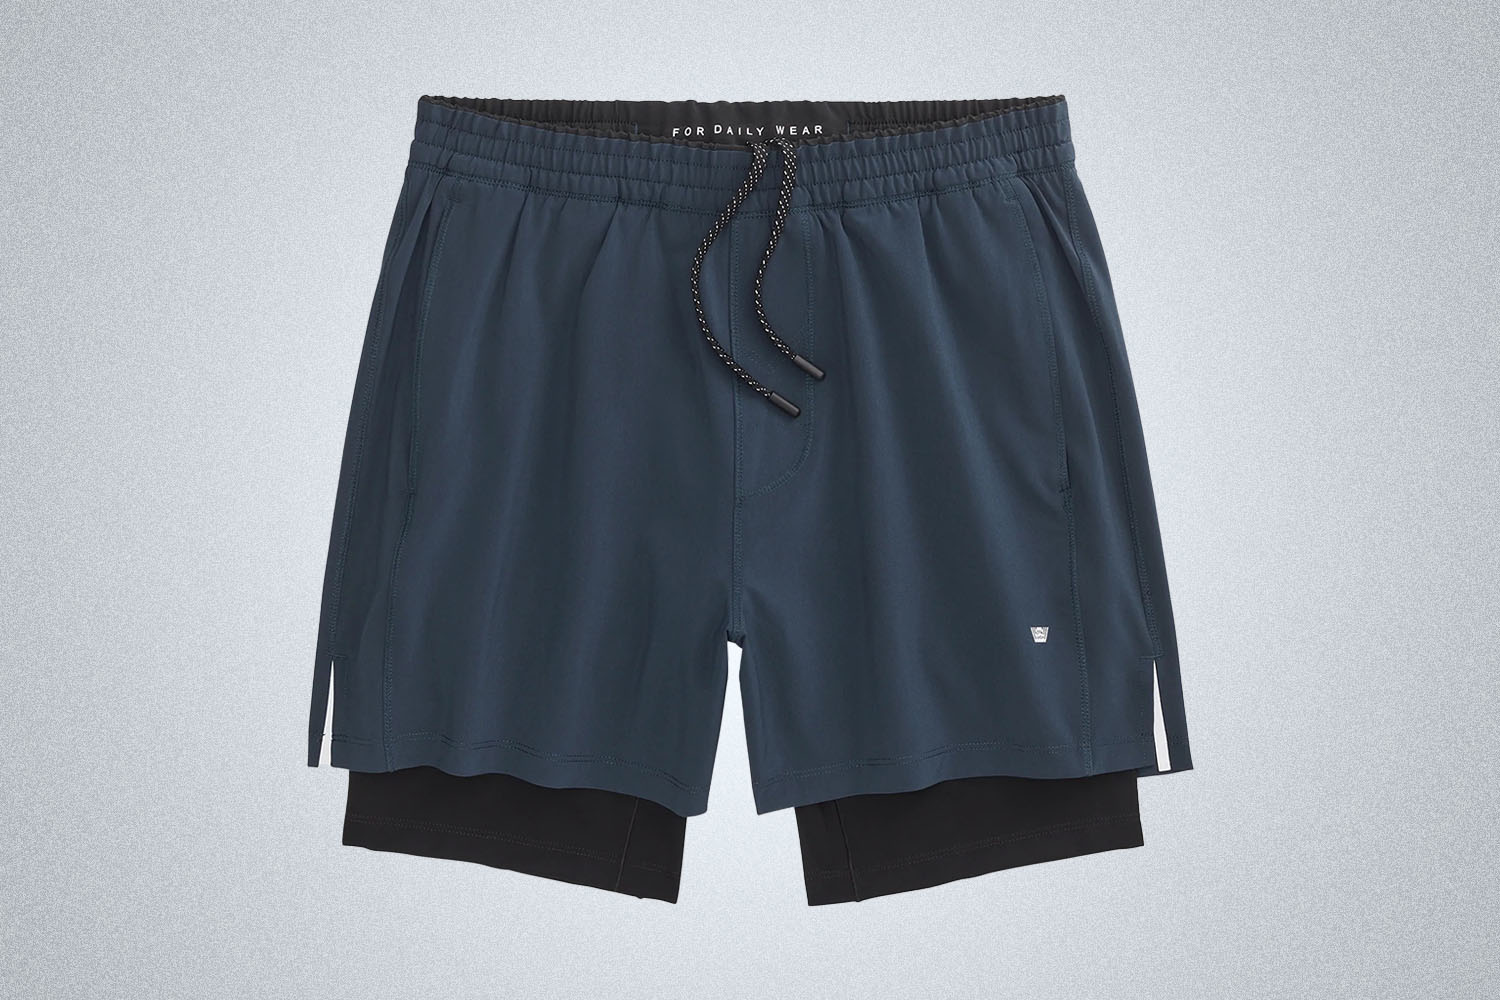 a pair of blue and black shorts from Mac Weldon on a grey background